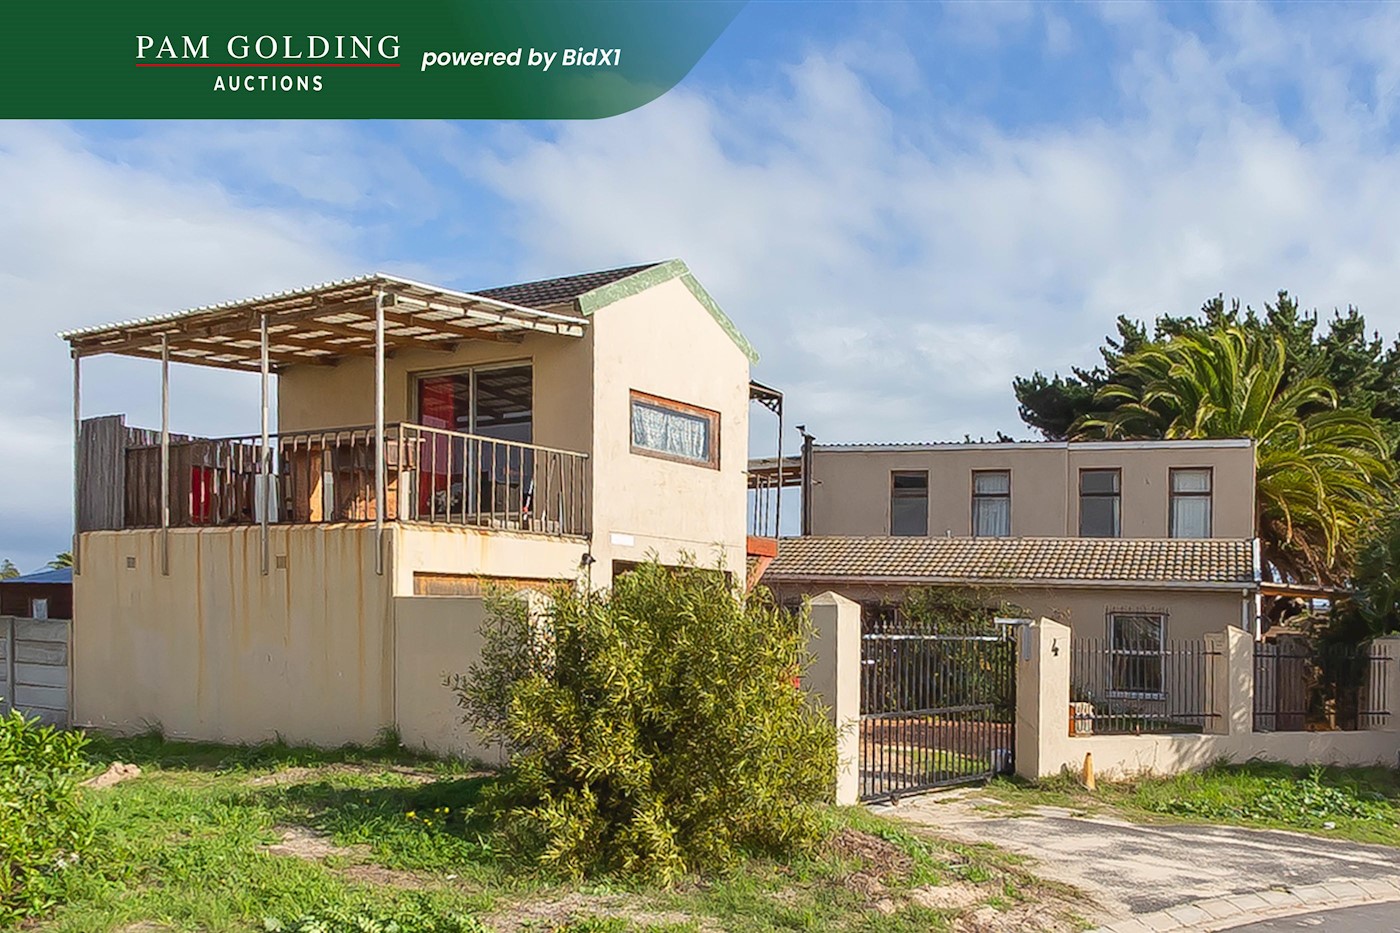 4 Shiraz Close, Table View, Table View, Western Cape, South Africa 1/15